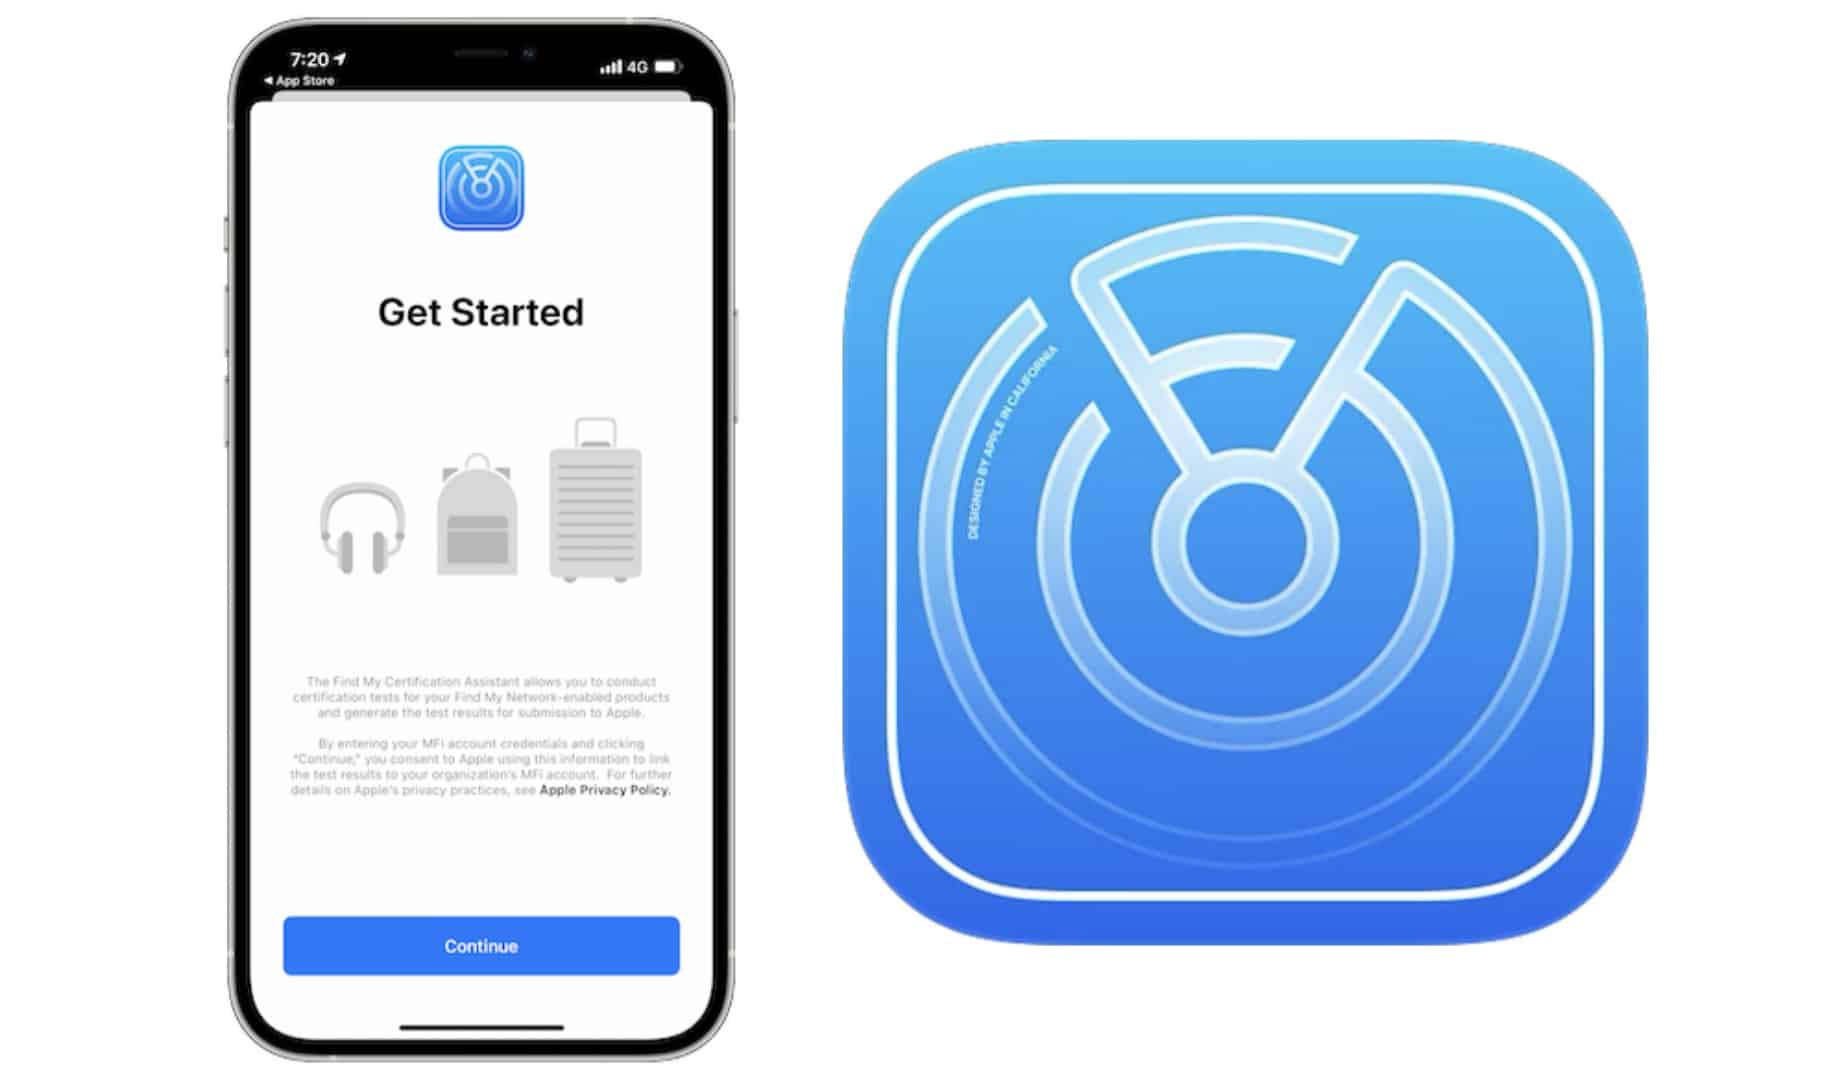 Apple Launches New Find My Certification Asst App for Third-Party Companies